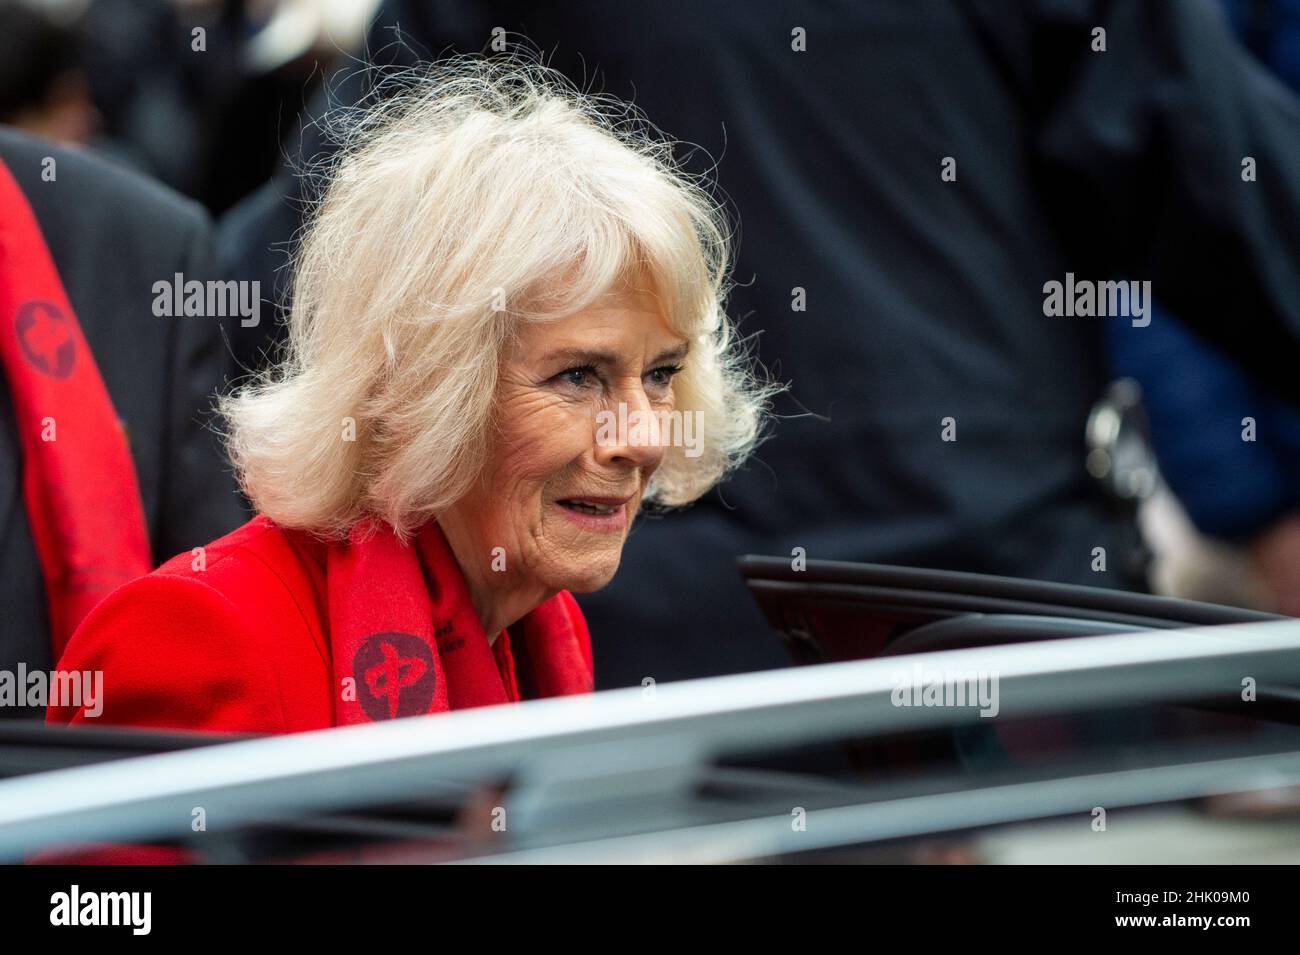 London, UK.  1 February 2022. The Duchess of Cornwall departs Chinatown after a visit to celebrate the Lunar New Year, the Year of the Tiger.  Credit: Stephen Chung / Alamy Live News Stock Photo